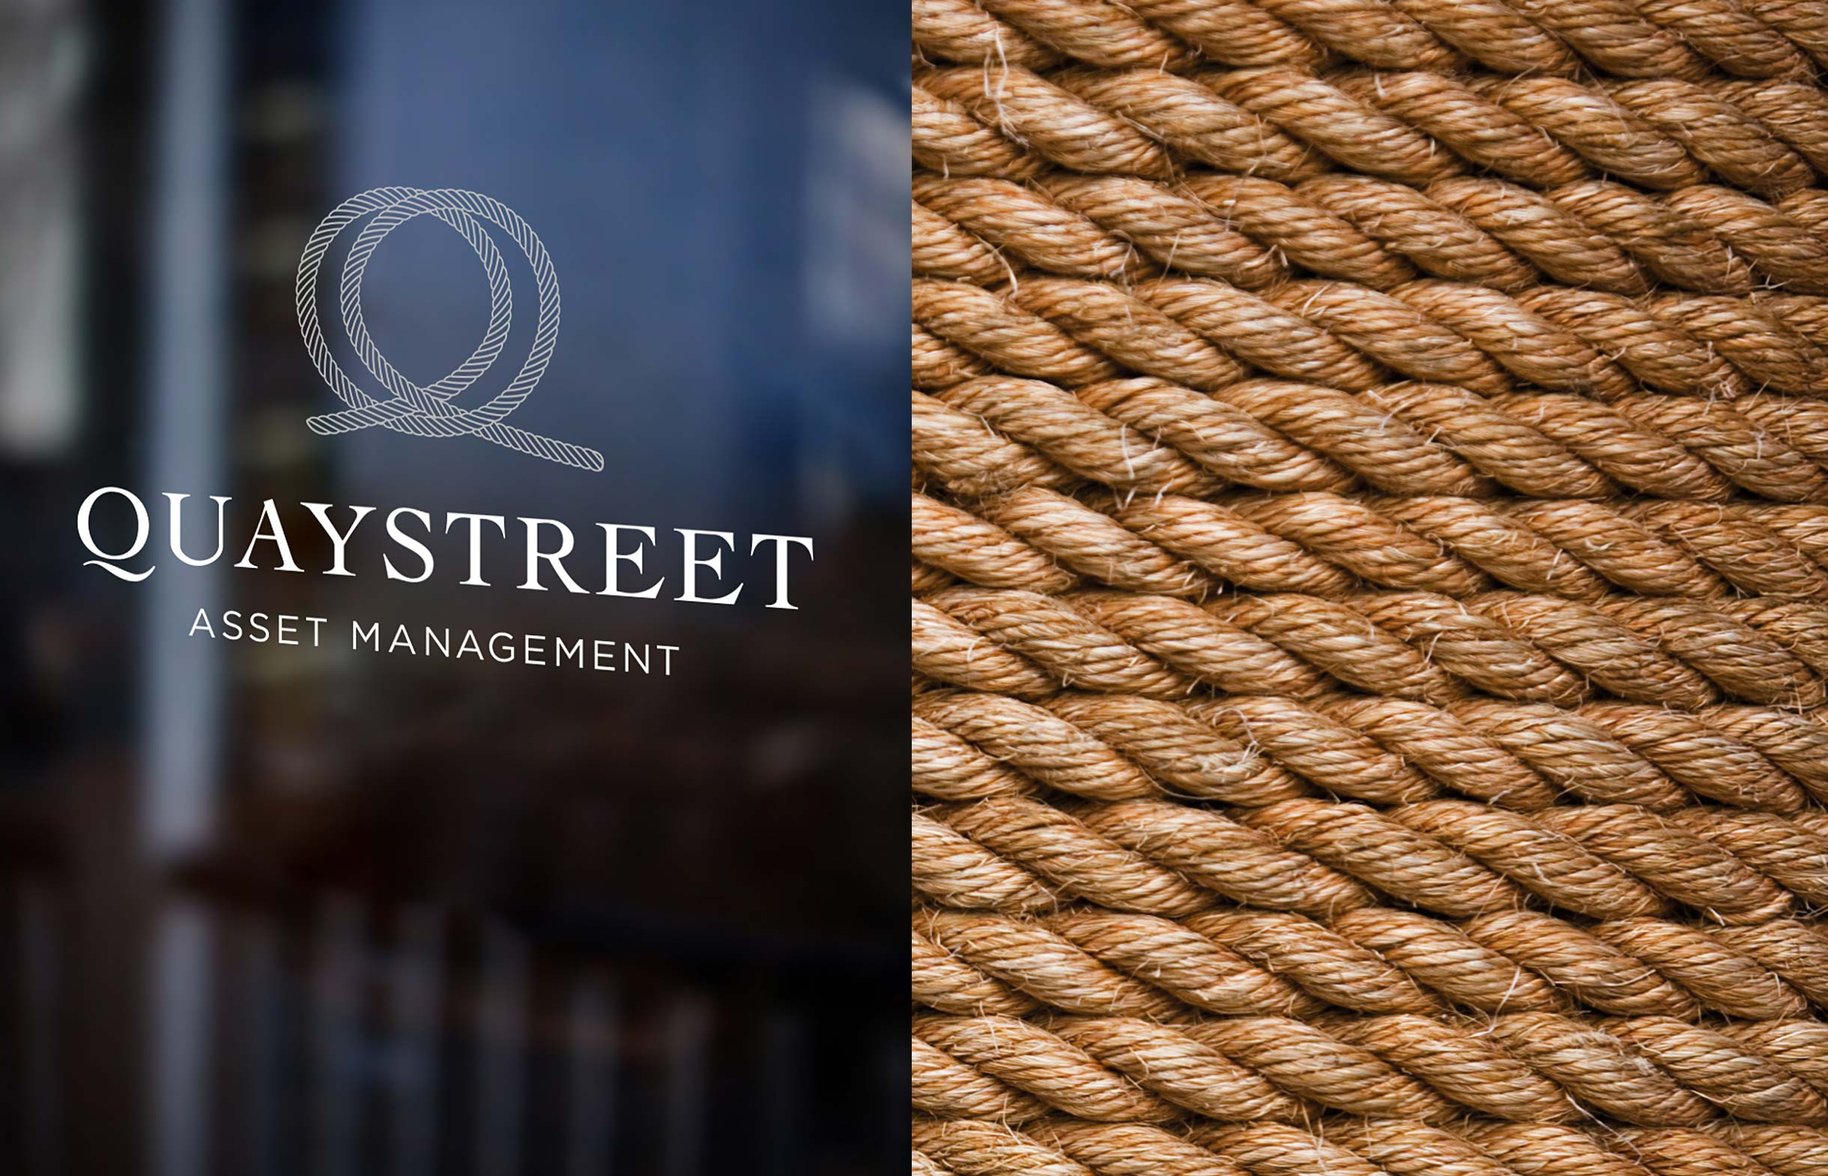 QuayStreet rope texture and logo on glass window